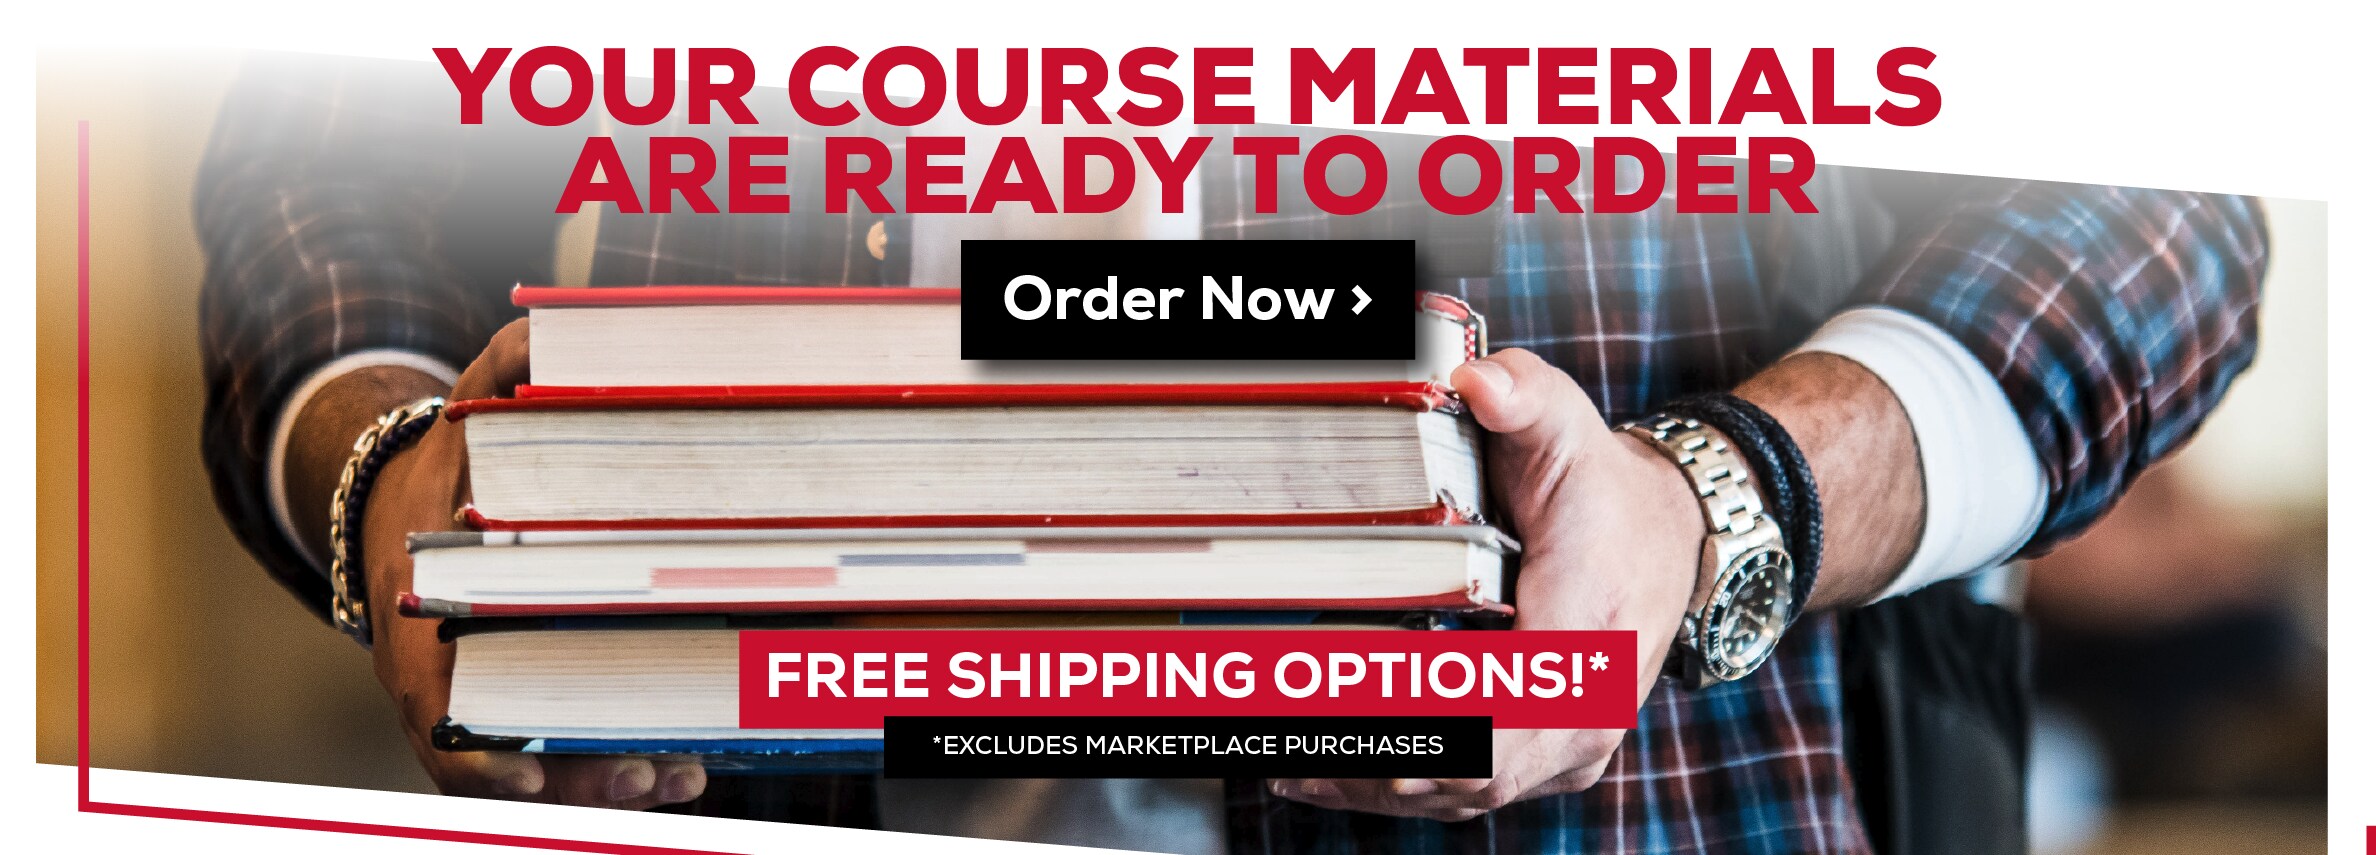 Your Course Materials Are Ready to Order. Order Now. Free shipping Options.* *Excludes marketplace purchases